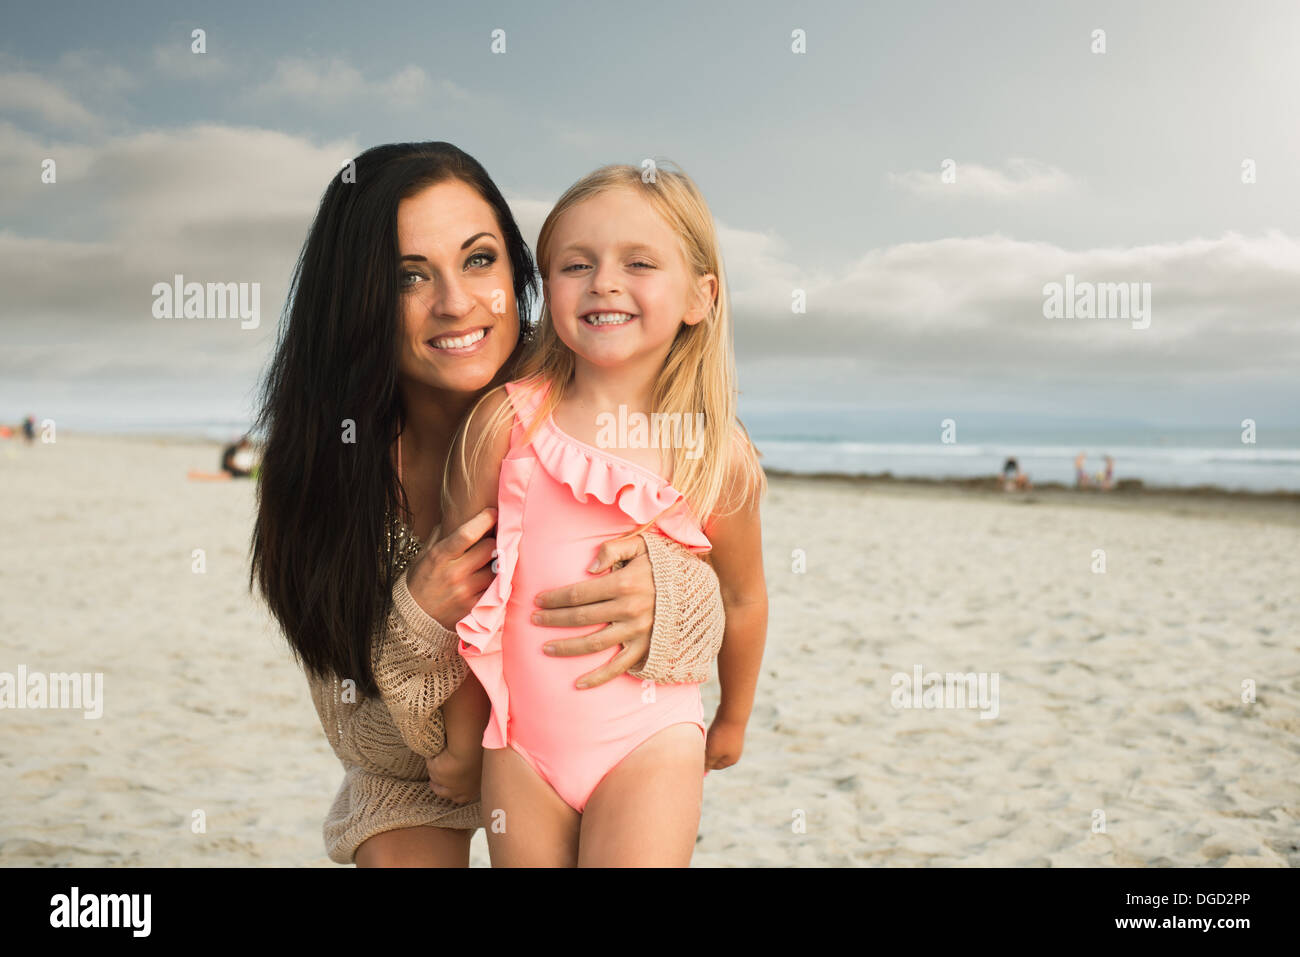 Young woman smiling with daughter on beach, portrait Banque D'Images